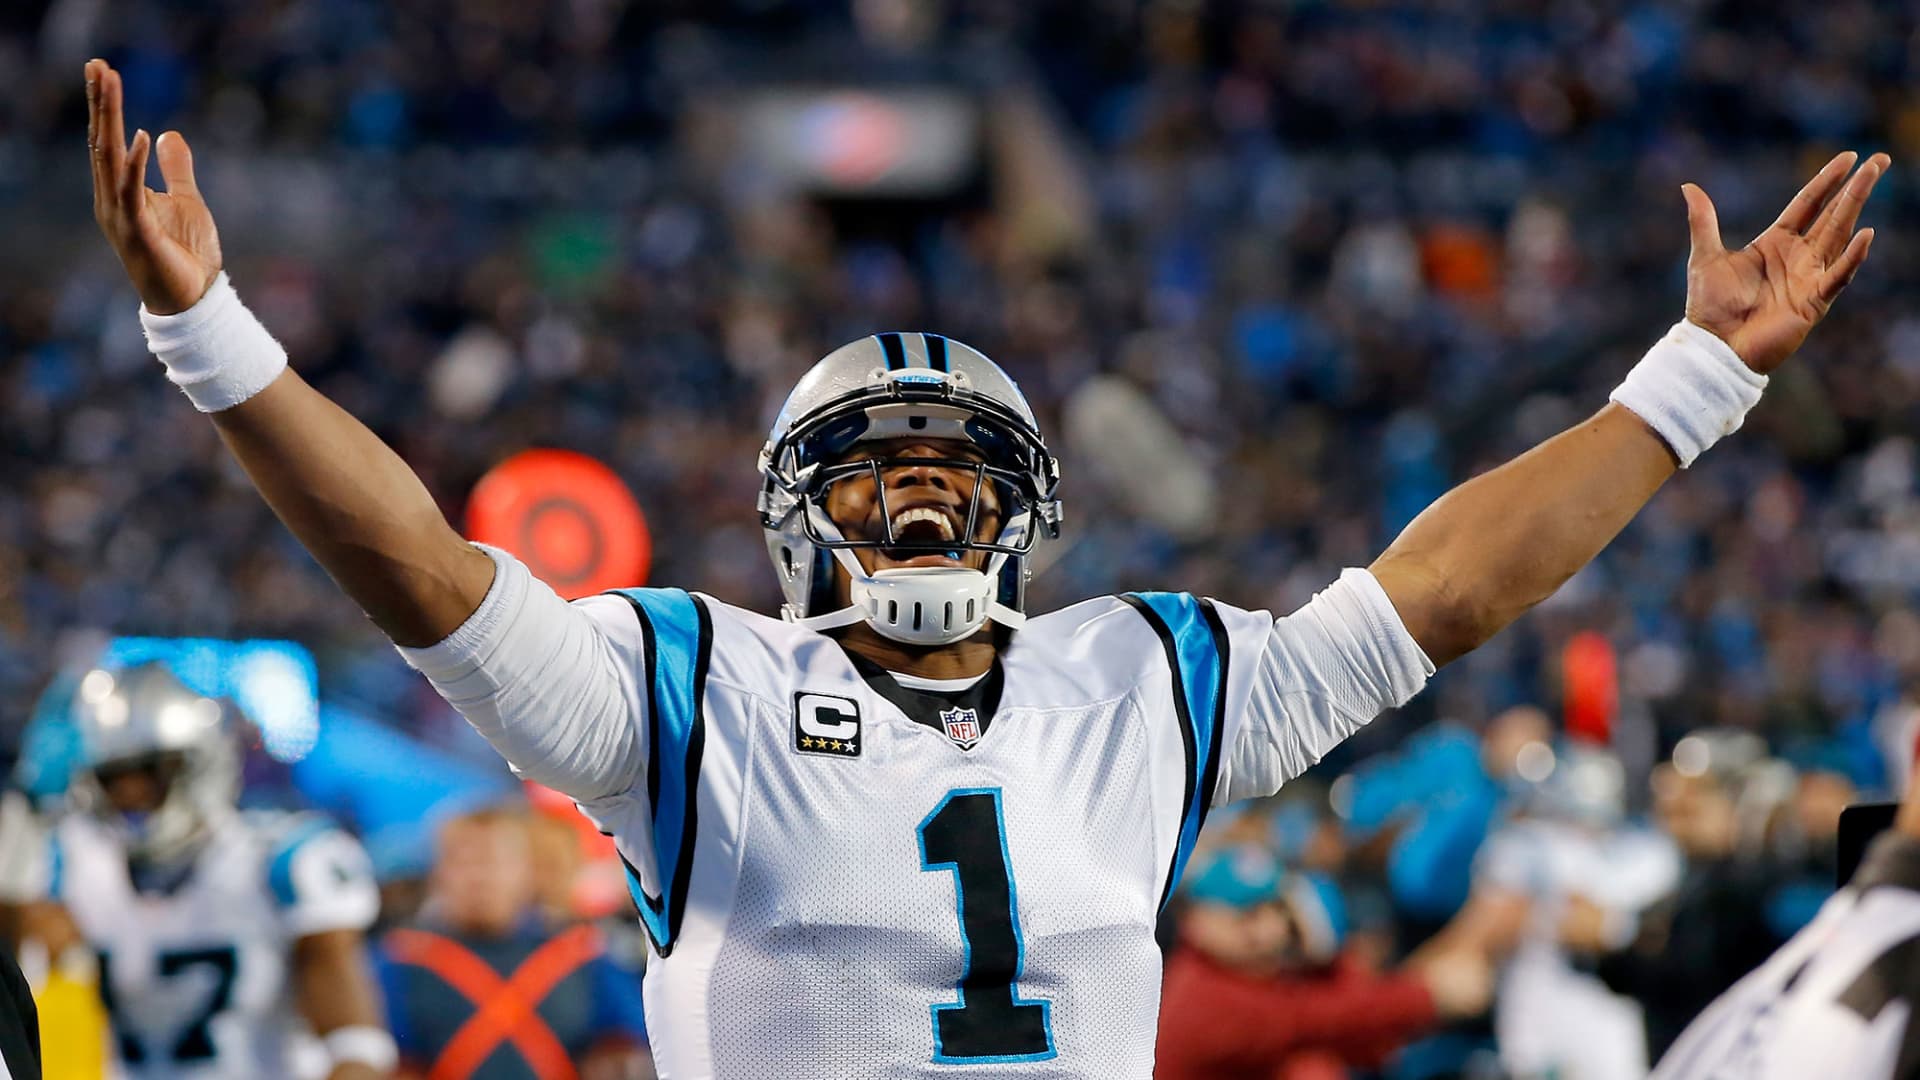 Cam Newton #1 of the Carolina Panthers celebrates Ted Ginn Jr. #19 touchdown in the first quarter against the Arizona Cardinals during the NFC Championship Game at Bank of America Stadium on January 24, 2016 in Charlotte, North Carolina.